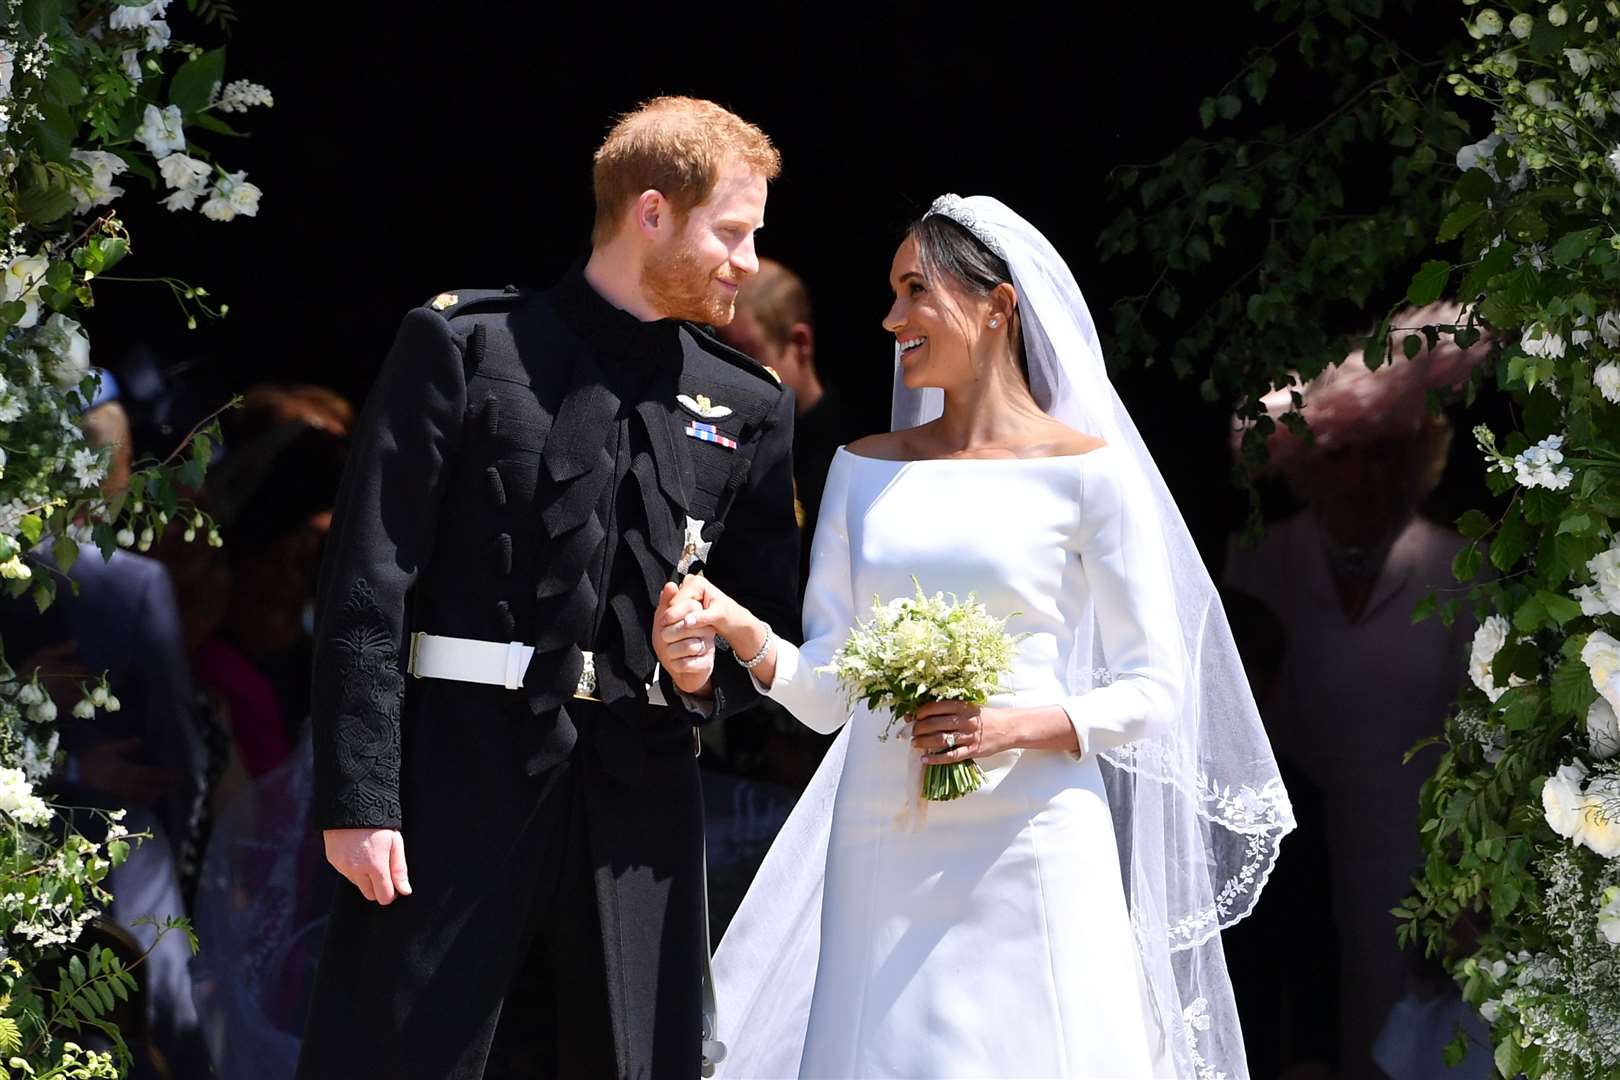 Meghan and Harry on their wedding day (Ben Stansall/PA)